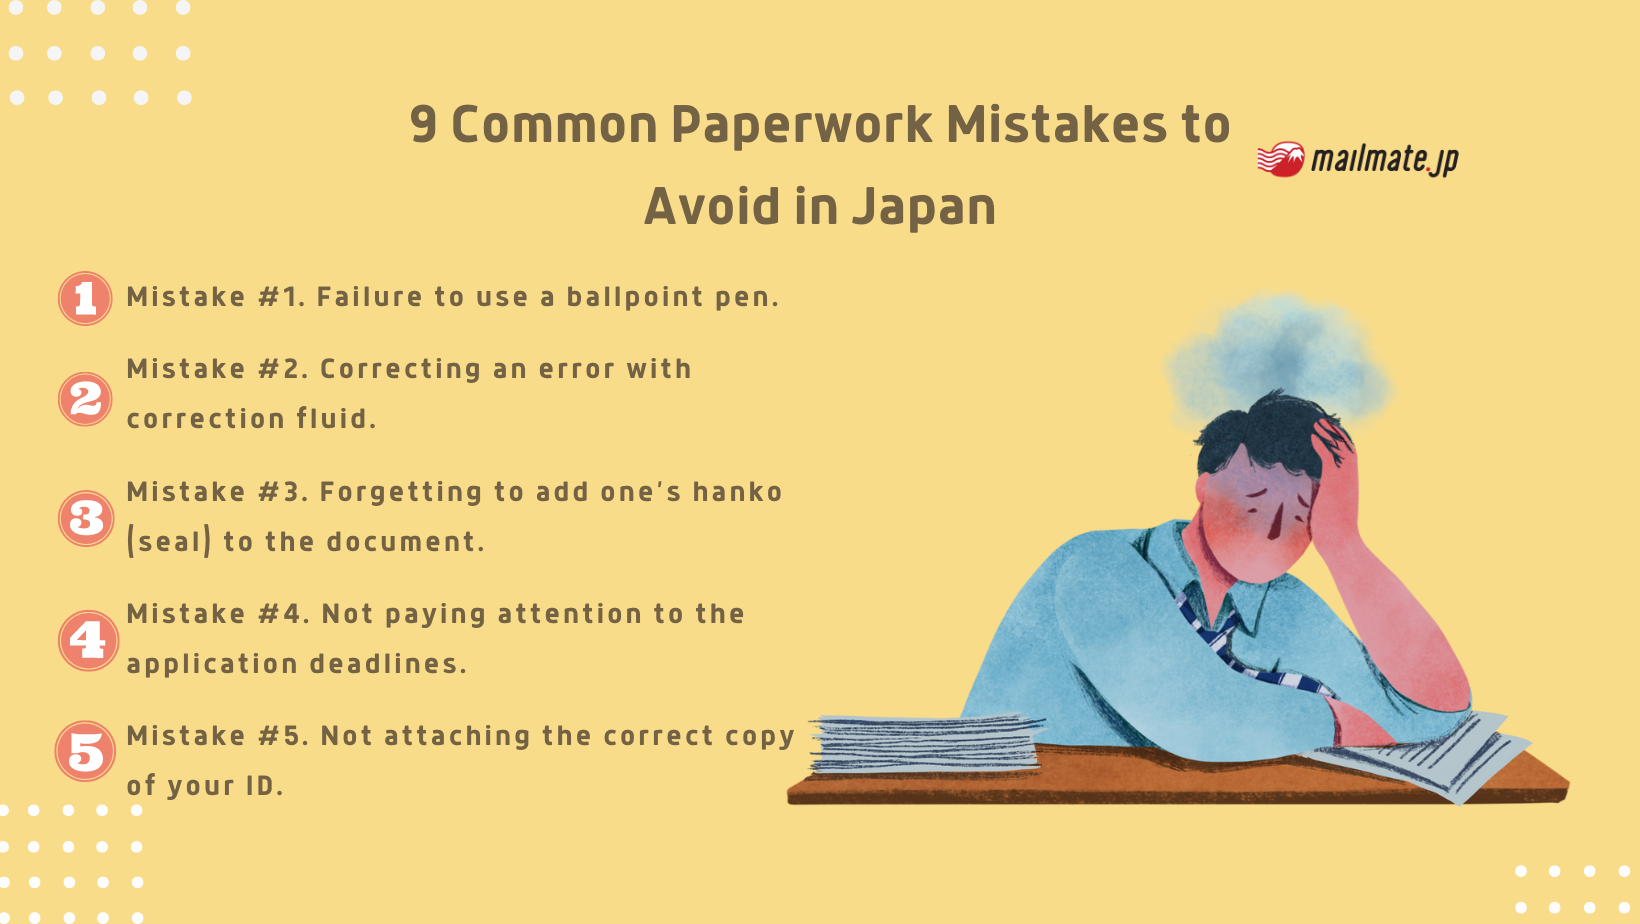 9 Common Paperwork Mistakes to Avoid in Japan